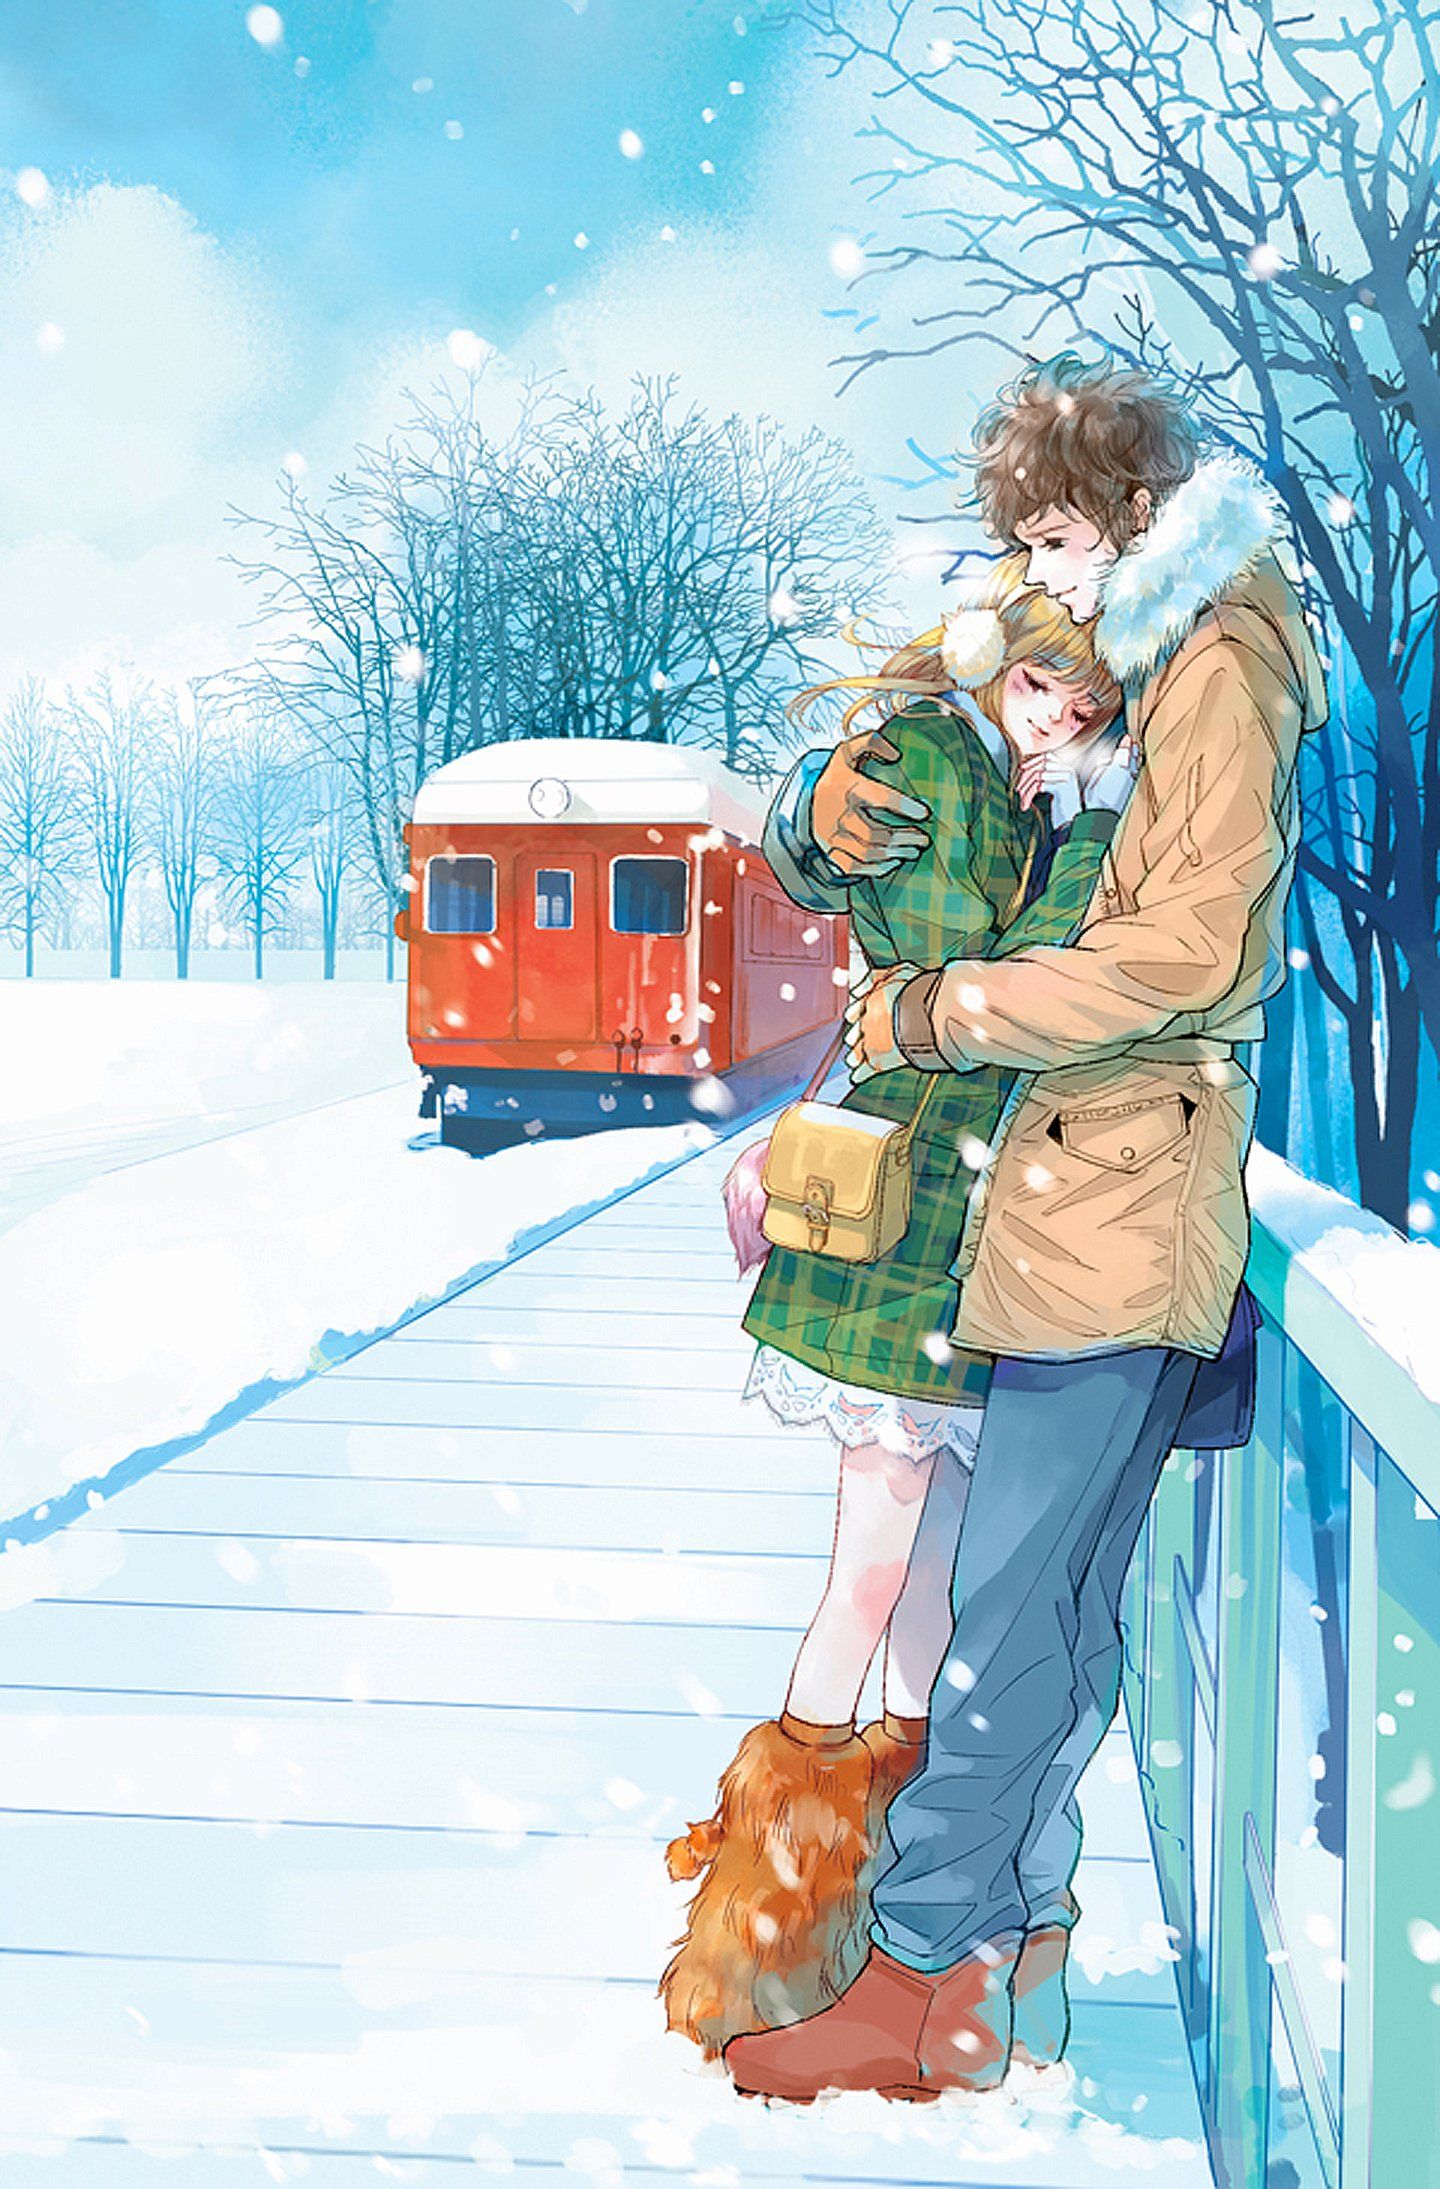 Cute Snow Couple LoveWallpapers